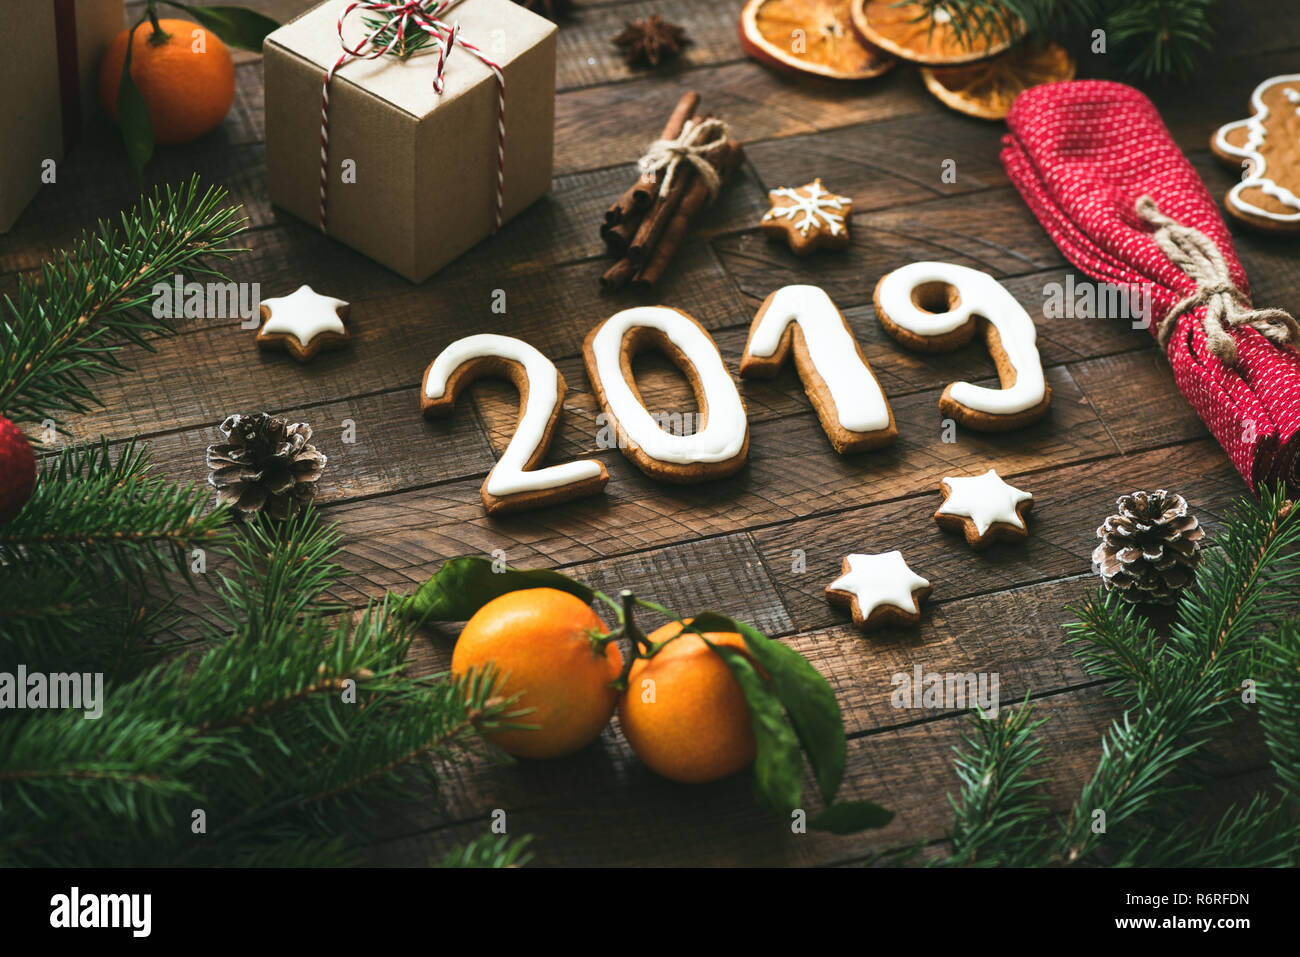 Christmas or New Year 2019 greeting card. Rustic Authentic Winter still life Stock Photo